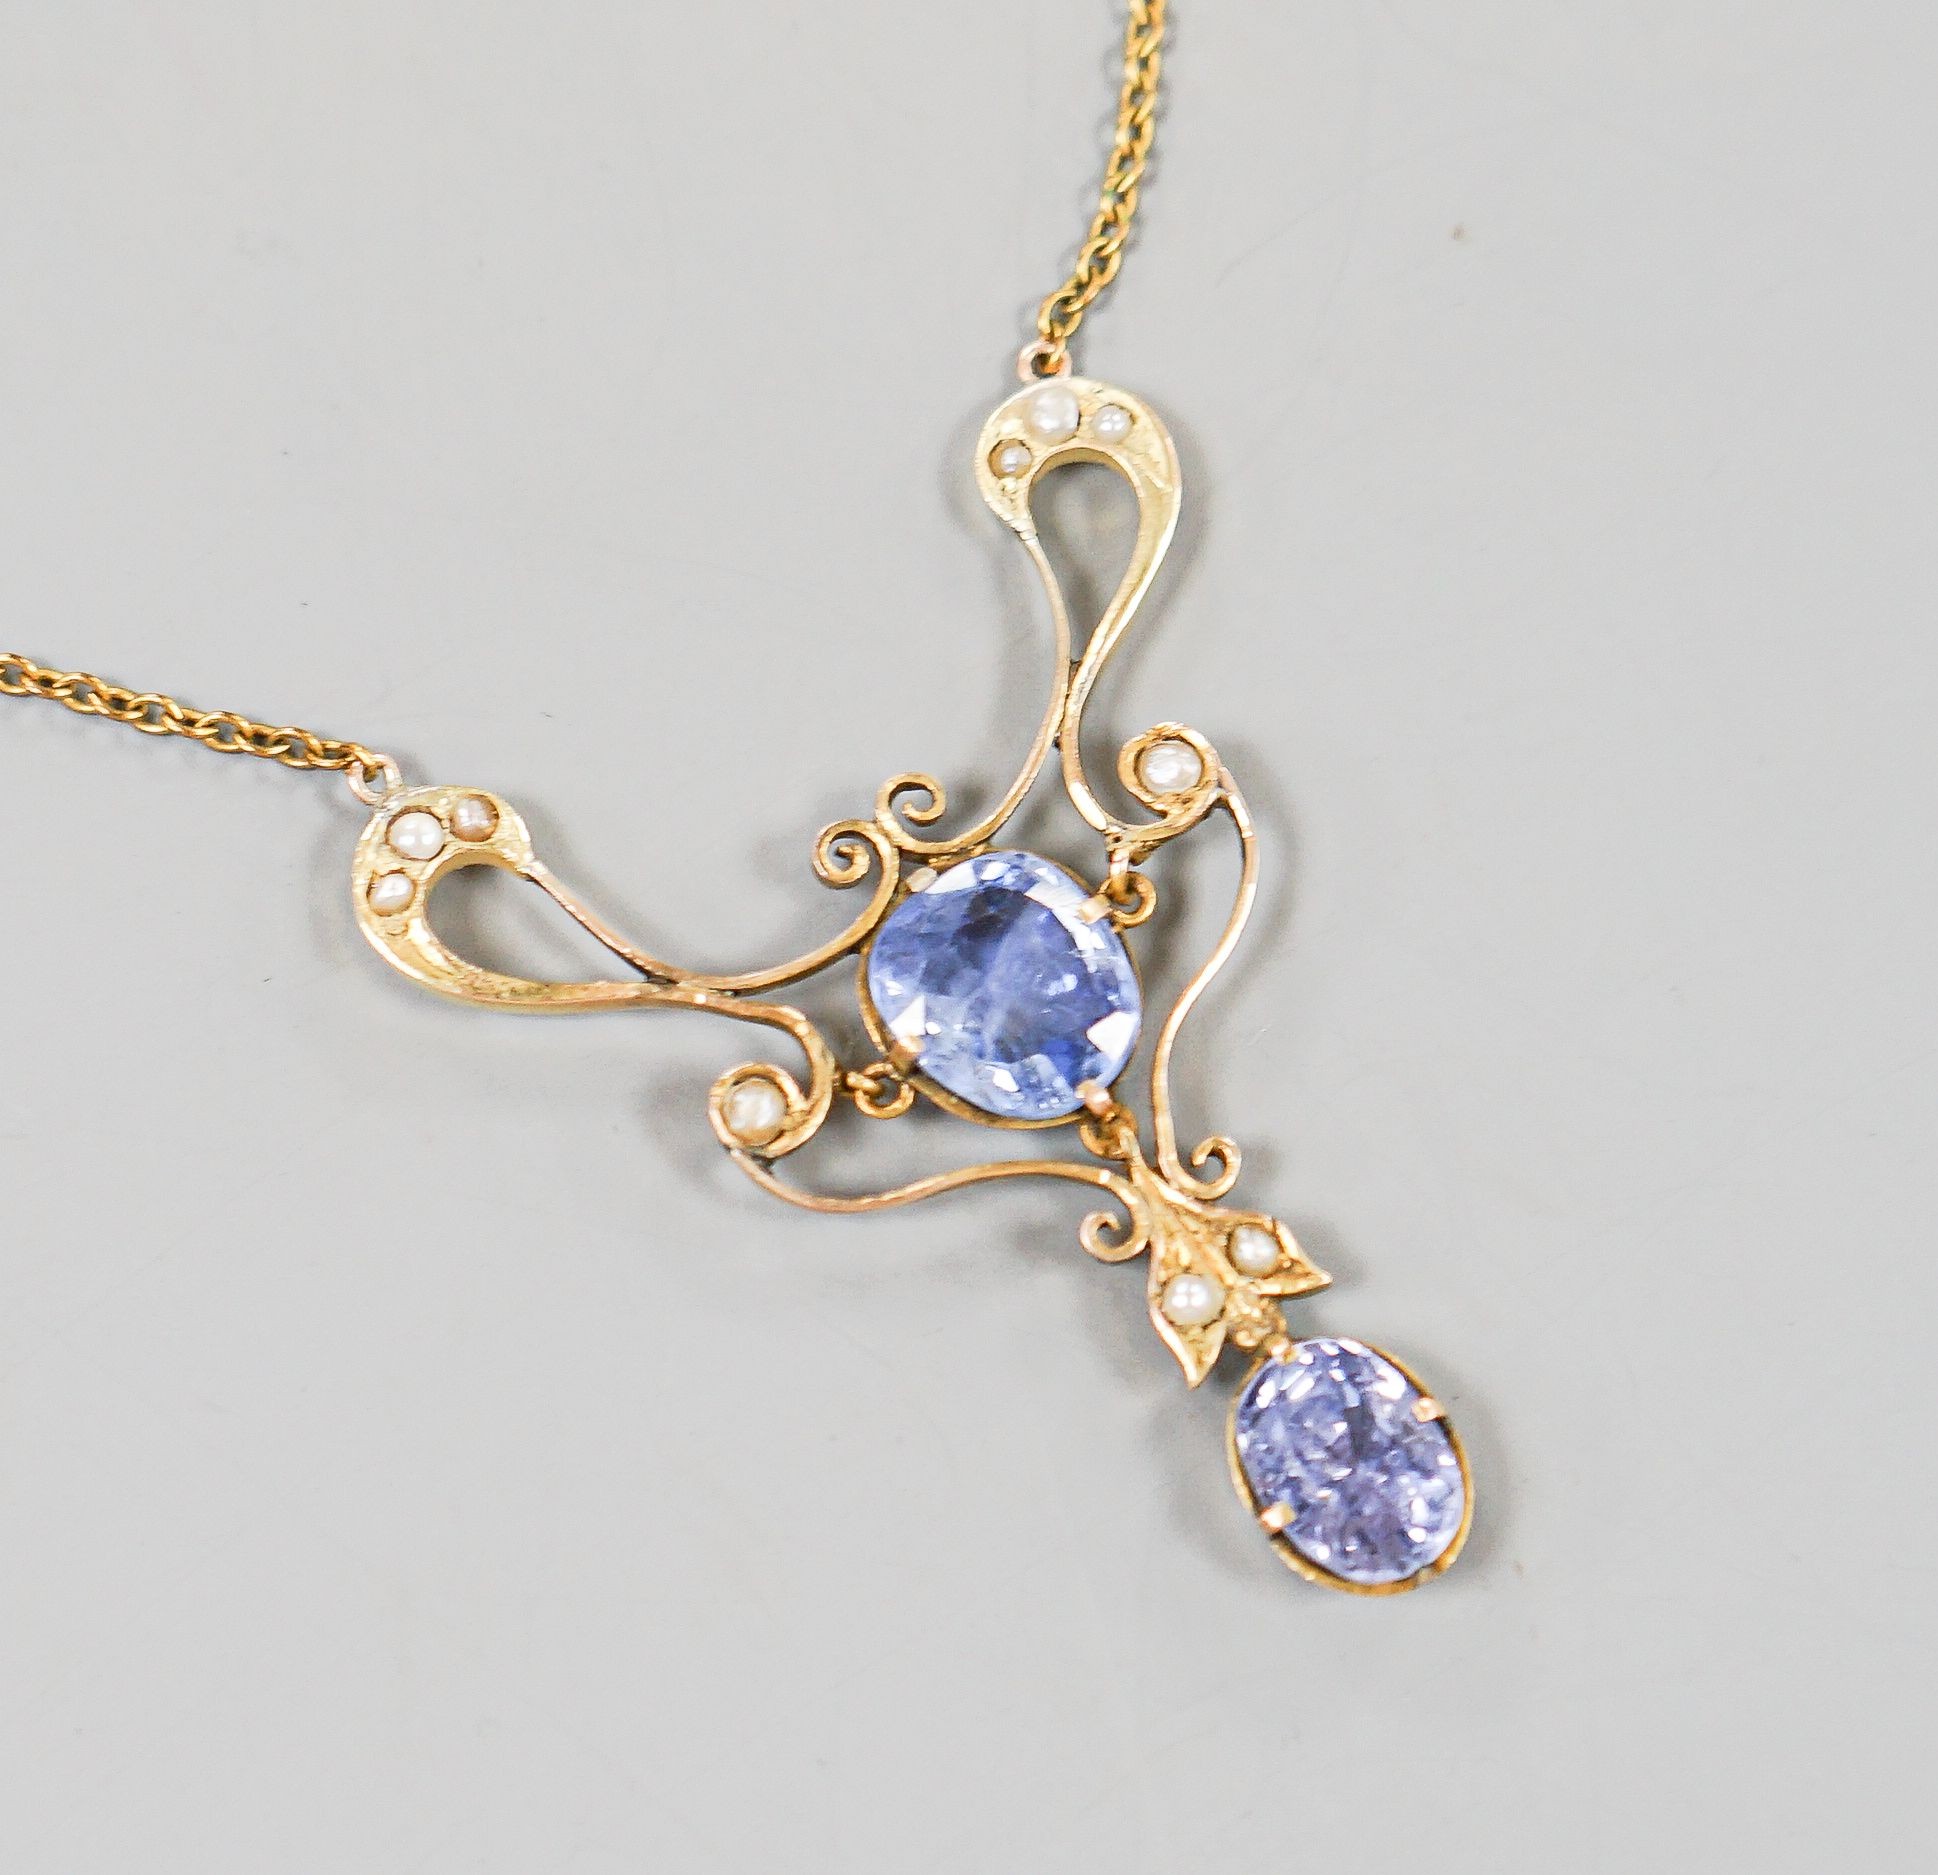 An early 20th century 9ct, two stone Ceylon sapphire and multi seed pearl set pendant necklace, pendant 49mm, chain approx. 40cm, gross weight 9.2 grams